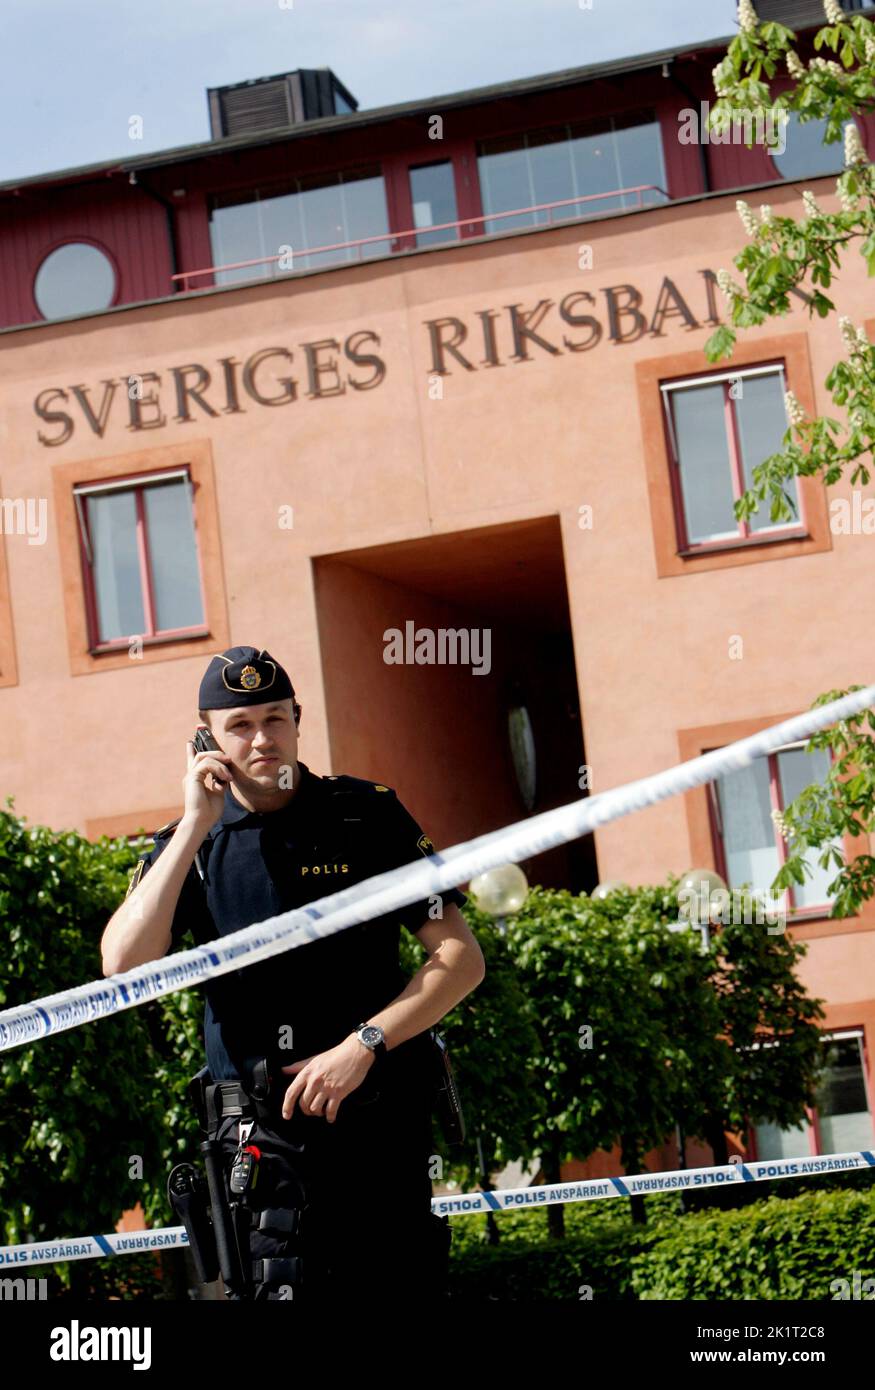 Several men forced their way into Securita's cash center in central Linköping with a wheel loader on Thursday morning. They didn't get any money, but a suspected bomb was left at the scene. At 11 o'clock in the morning, no suspected perpetrators had yet been arrested. Stock Photo